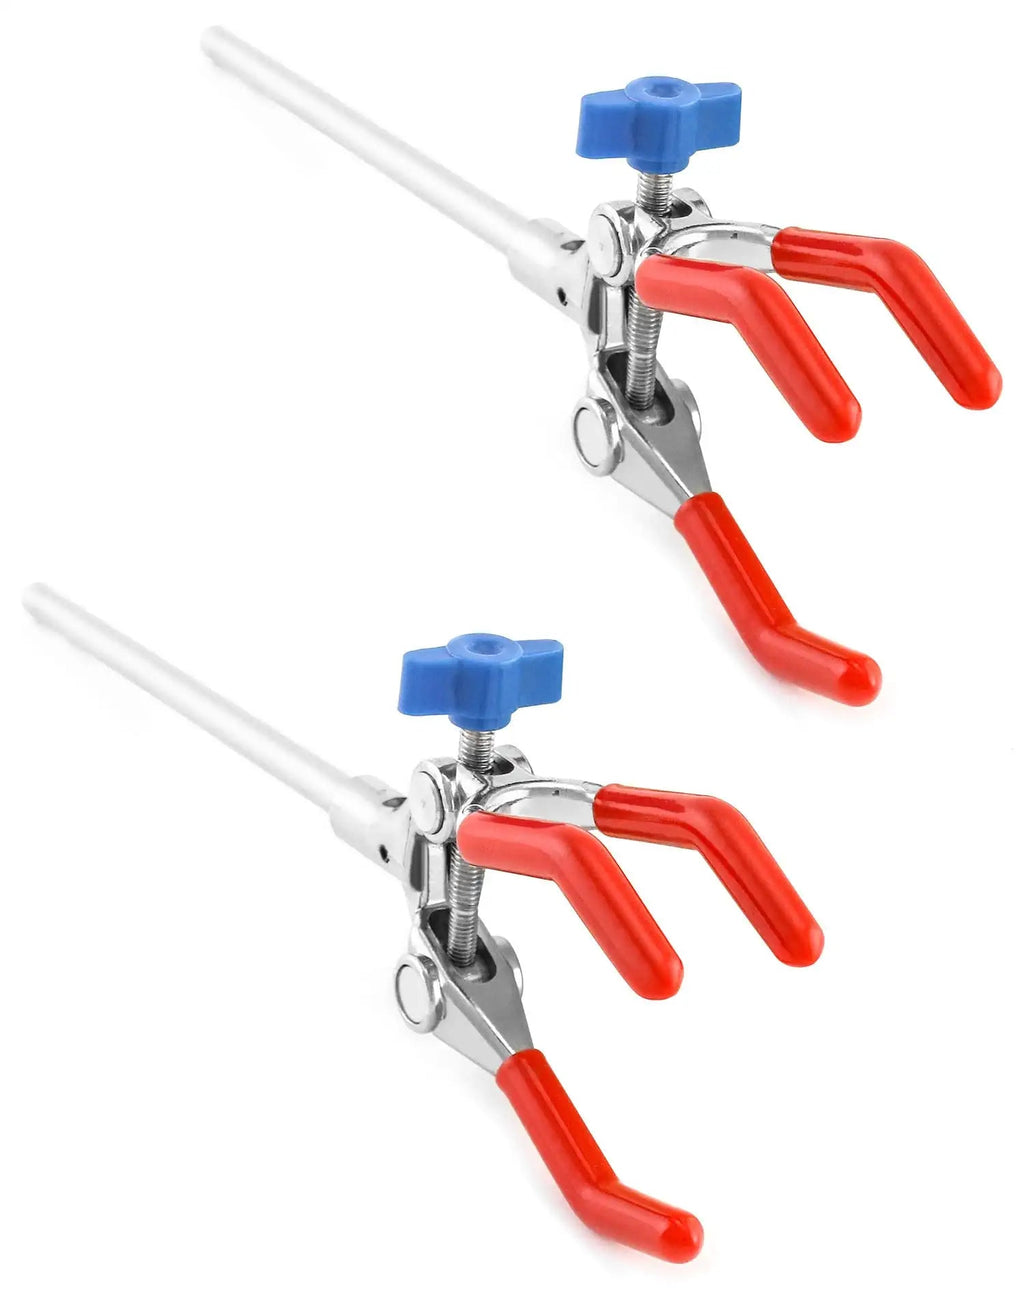  [AUSTRALIA] - QWORK Lab Clamp 3 Prong Finger with Rubber-Coated Head, 2 Pack, Adjustable Jaw 10-90mm 3 Prong Clamp